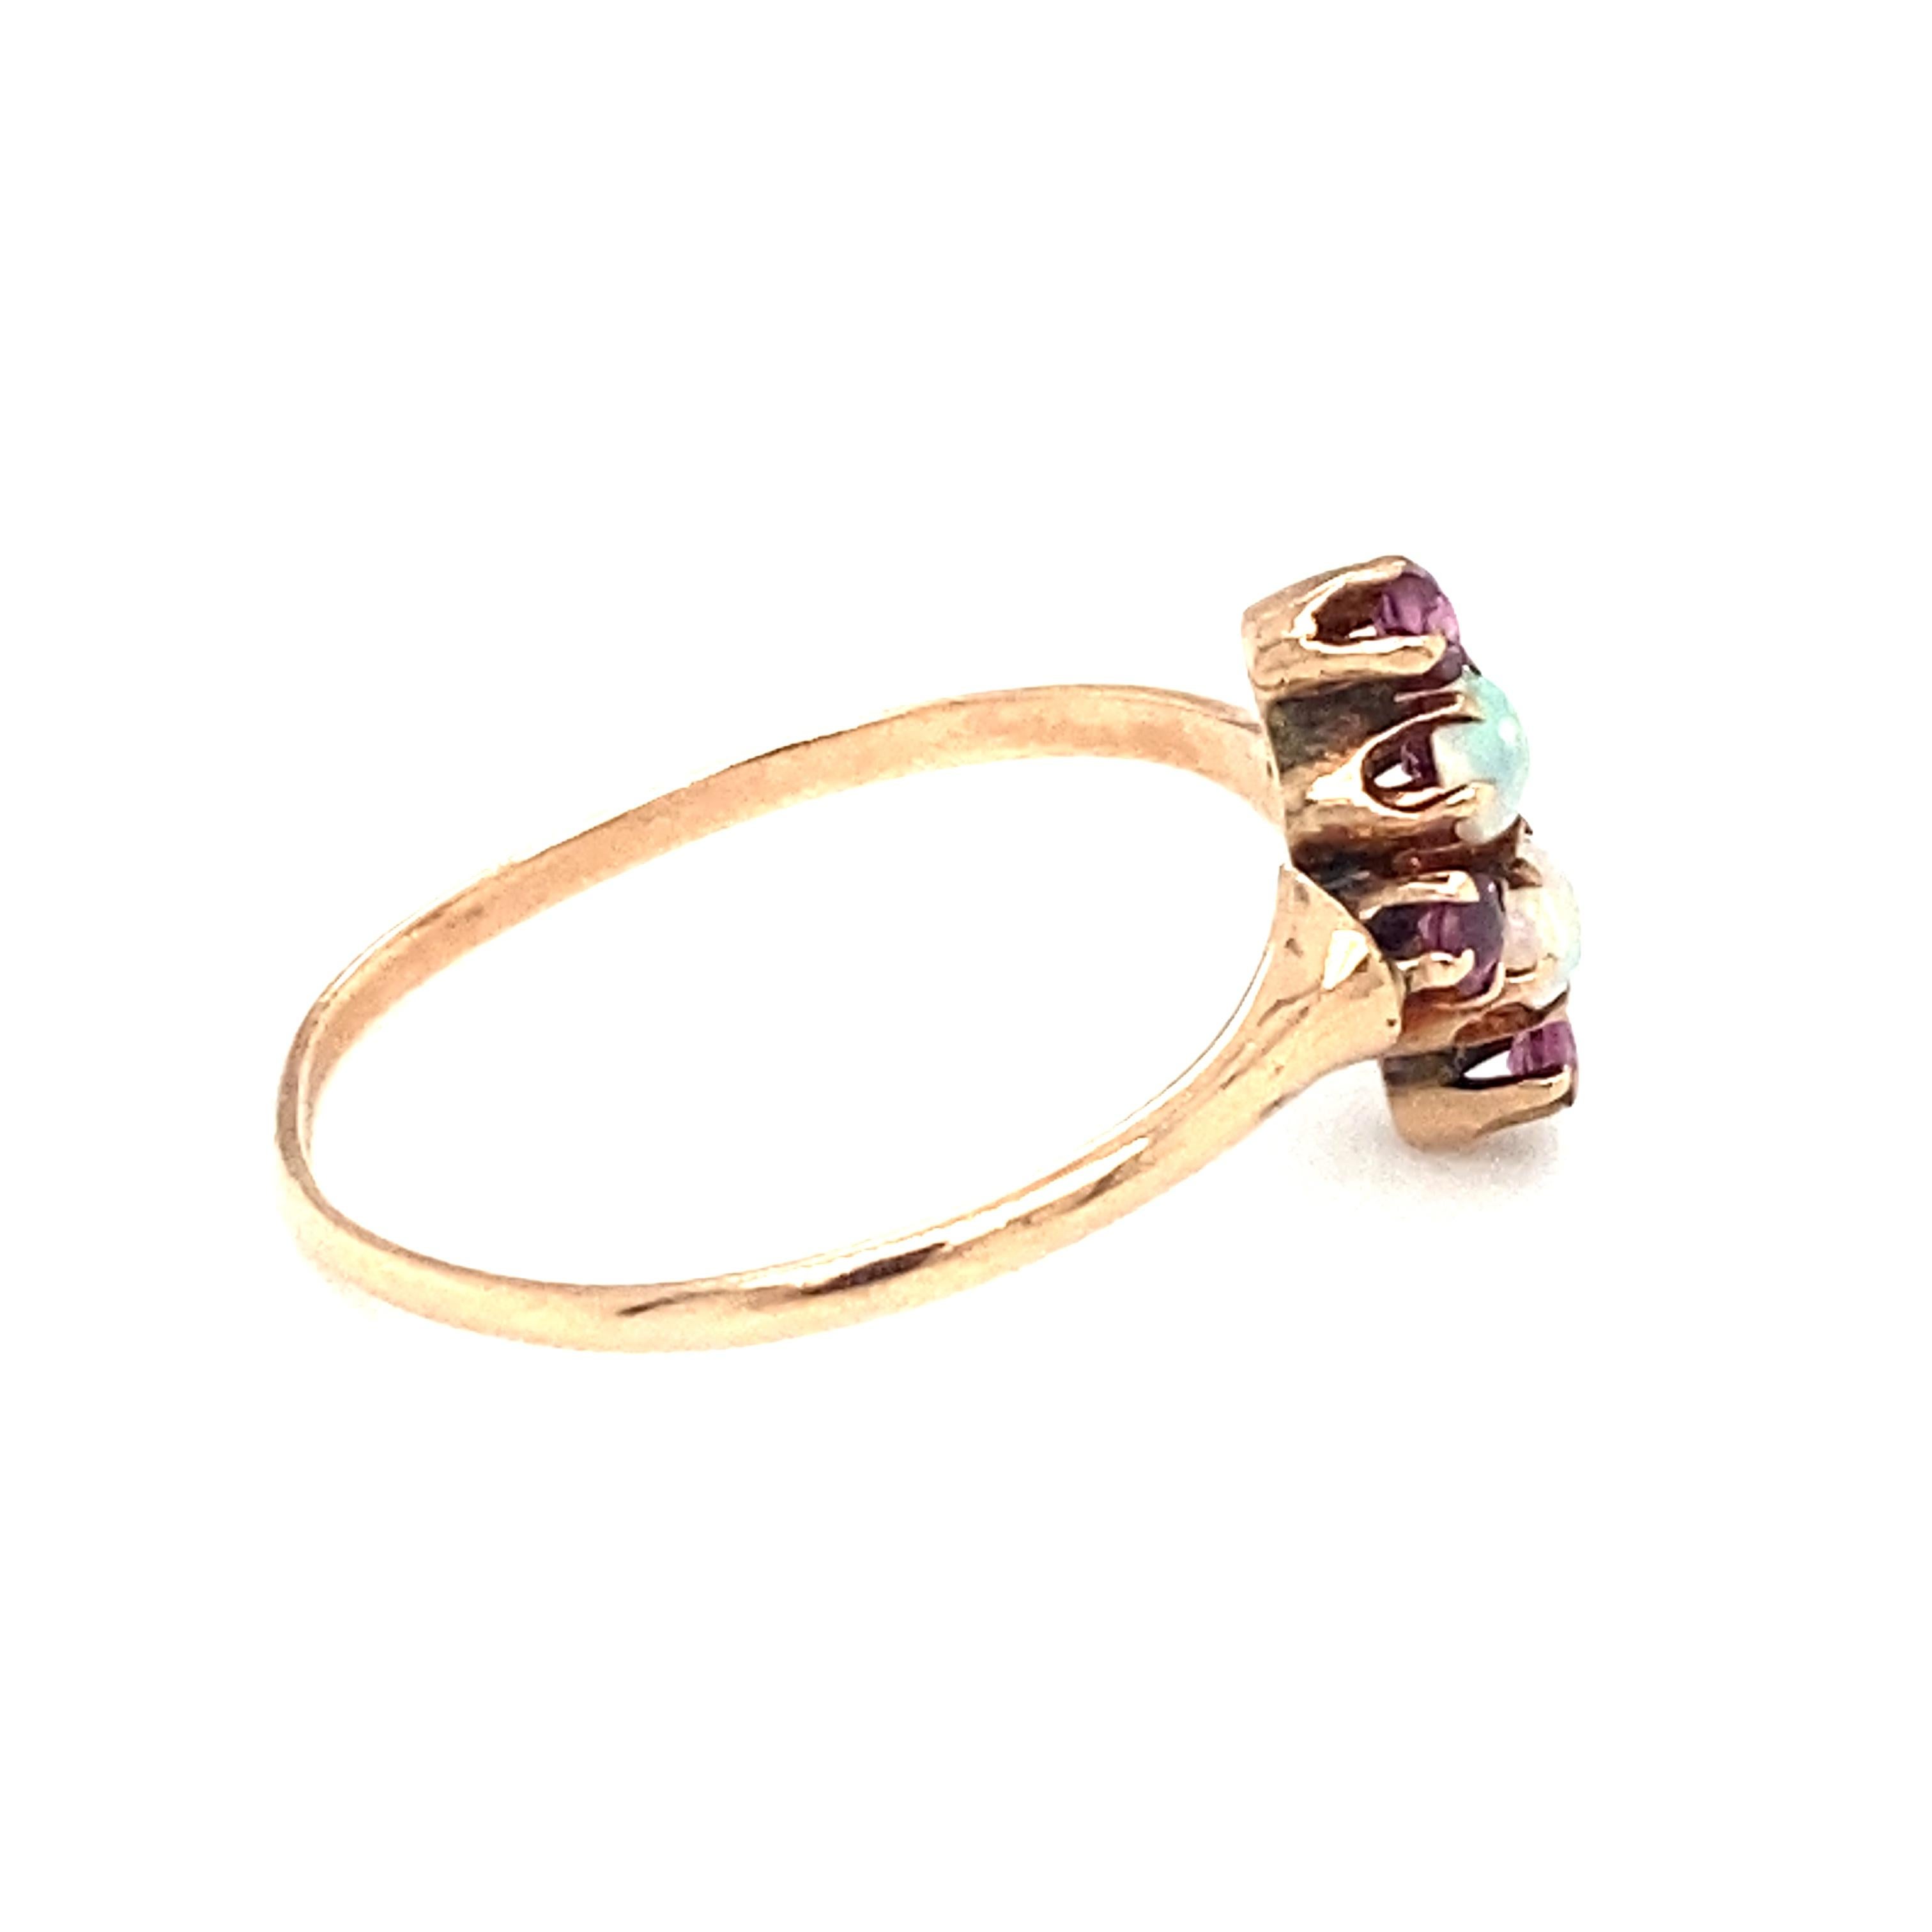 Cabochon Circa 1890s Pink Sapphire and Ethiopian Opal Ring in 9 Karat Gold For Sale